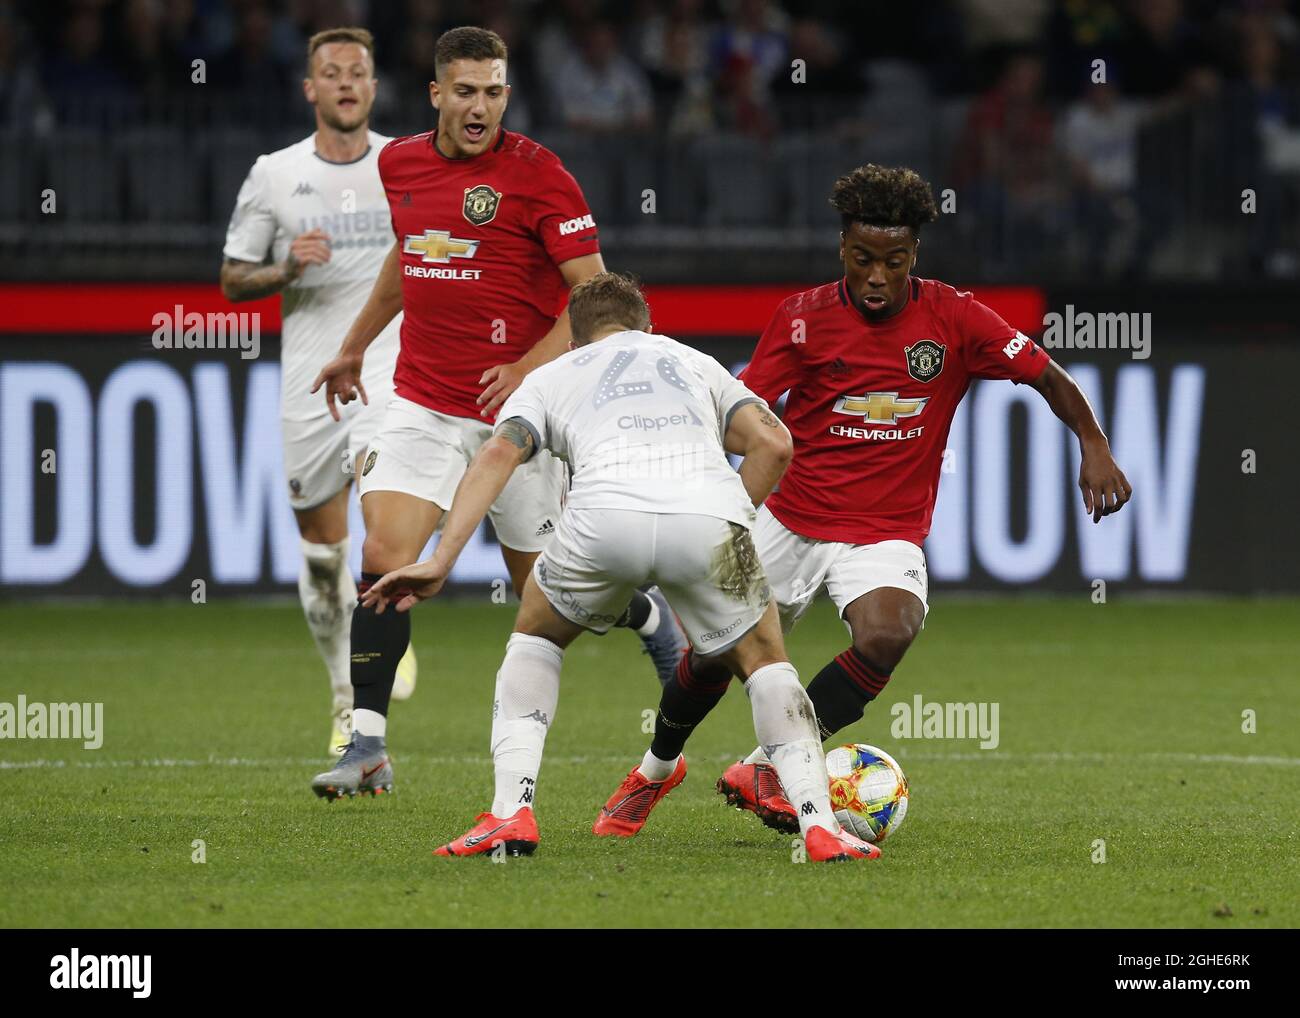 Manchester United Angel Gomes controls the ball during the Pre Season  Friendly match at the Optus Stadium, Perth. Picture date: 17th July 2019.  Picture credit should read: Theron Kirkman/Sportimage via PA Images